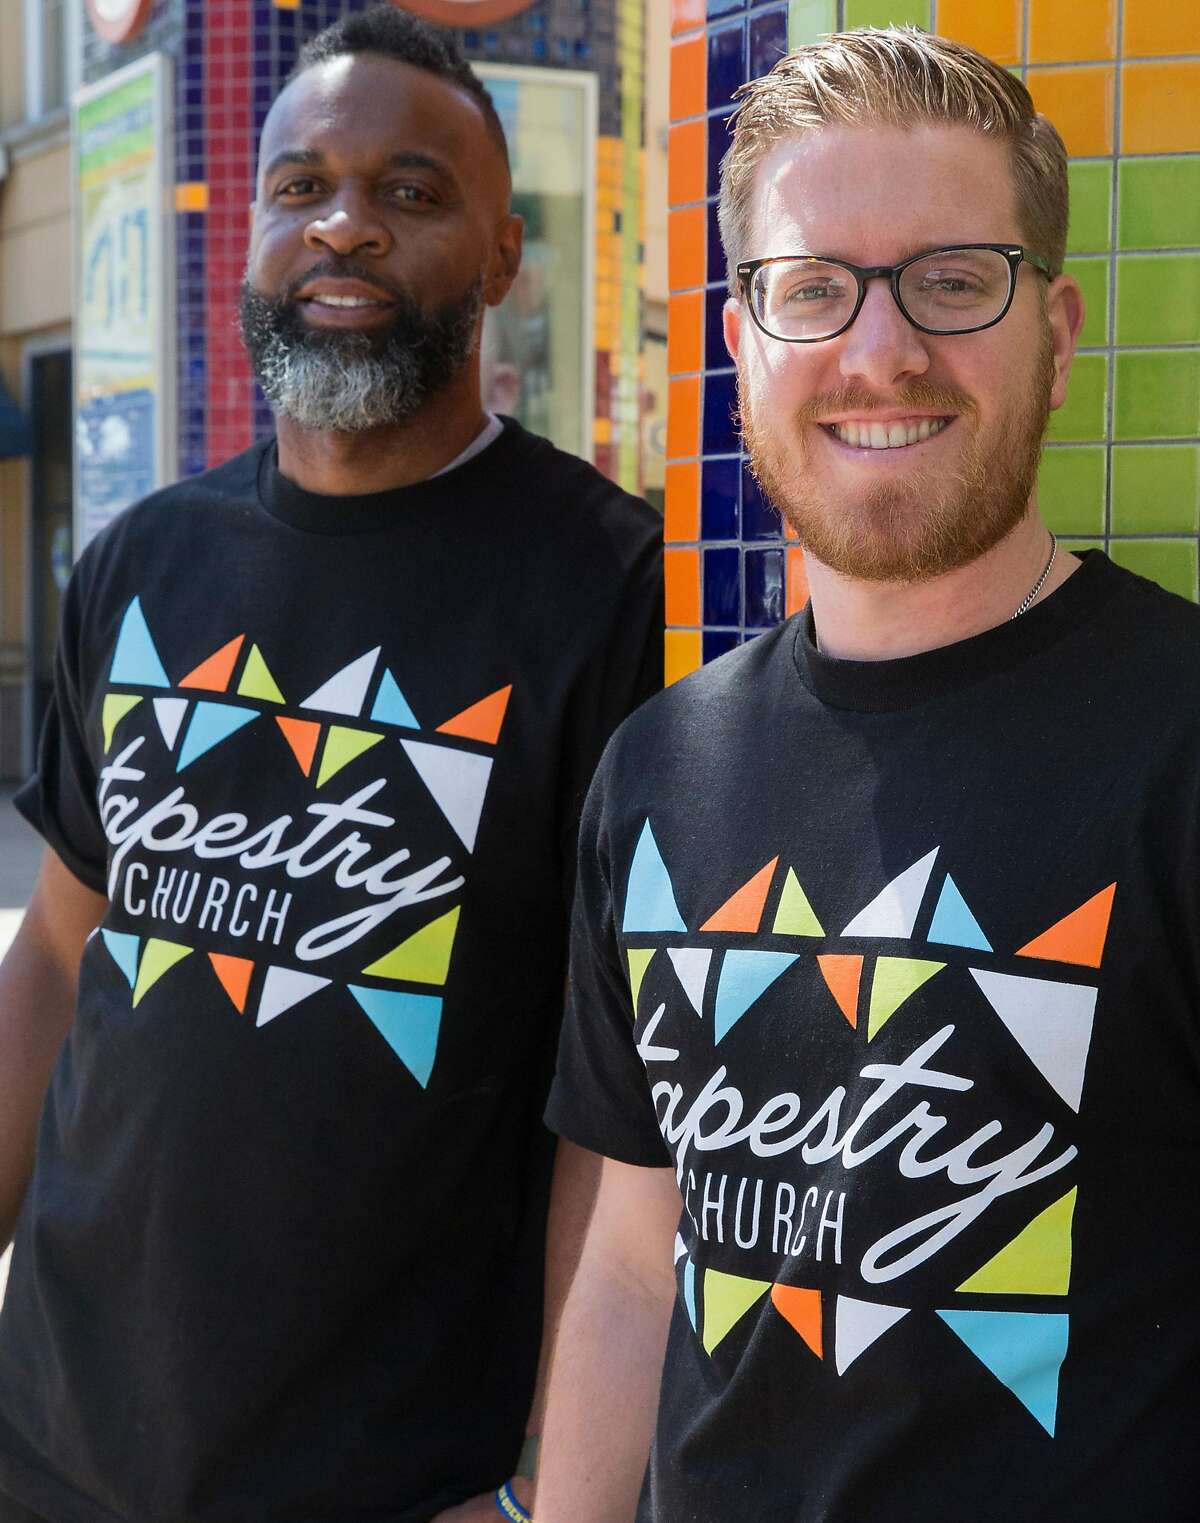 Tapestry Church founders and pastors Kyle Brooks, left, and Bernard Emerson pose for a portrait in Oakland, Calif. Friday, June 1, 2018.